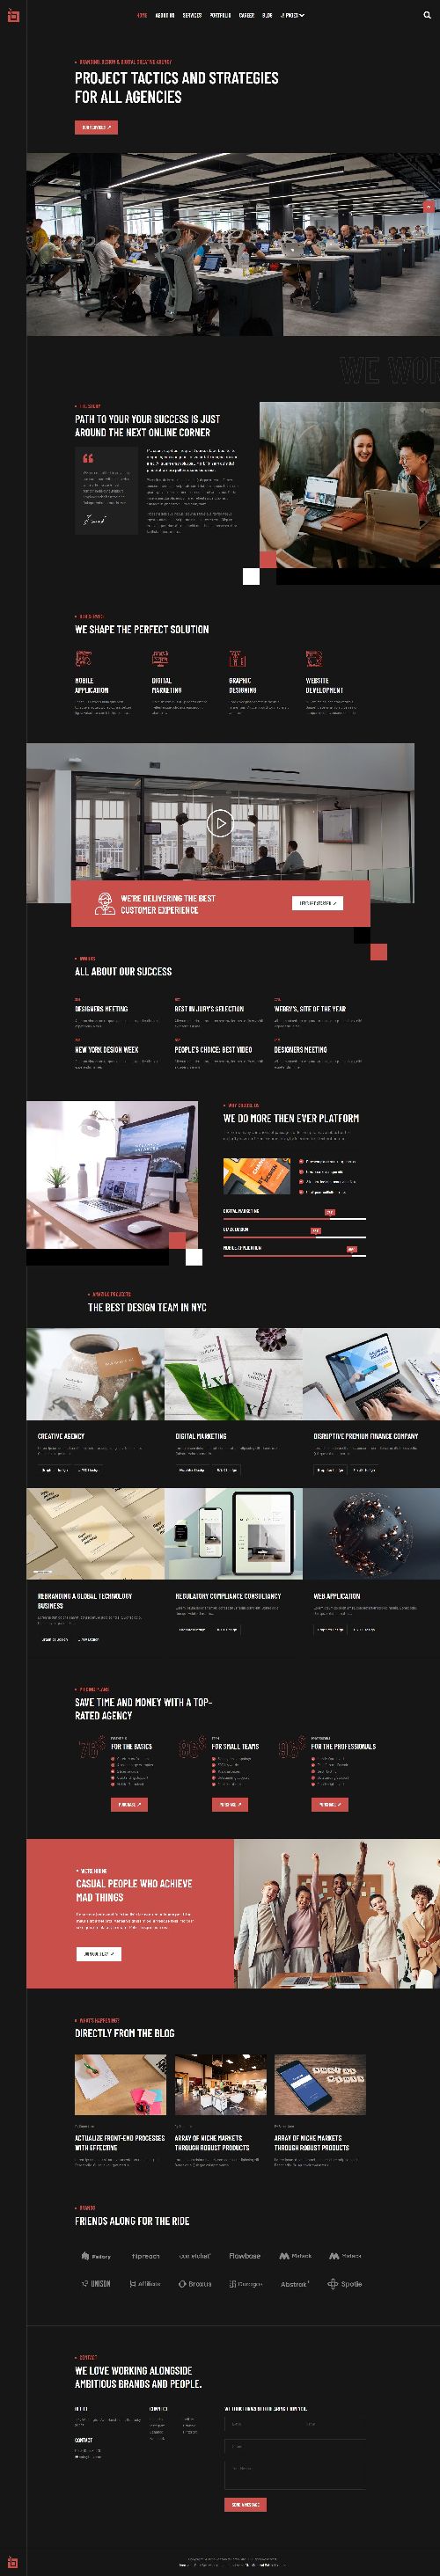 Compact - Joomla Template for Business and Corporate Sites